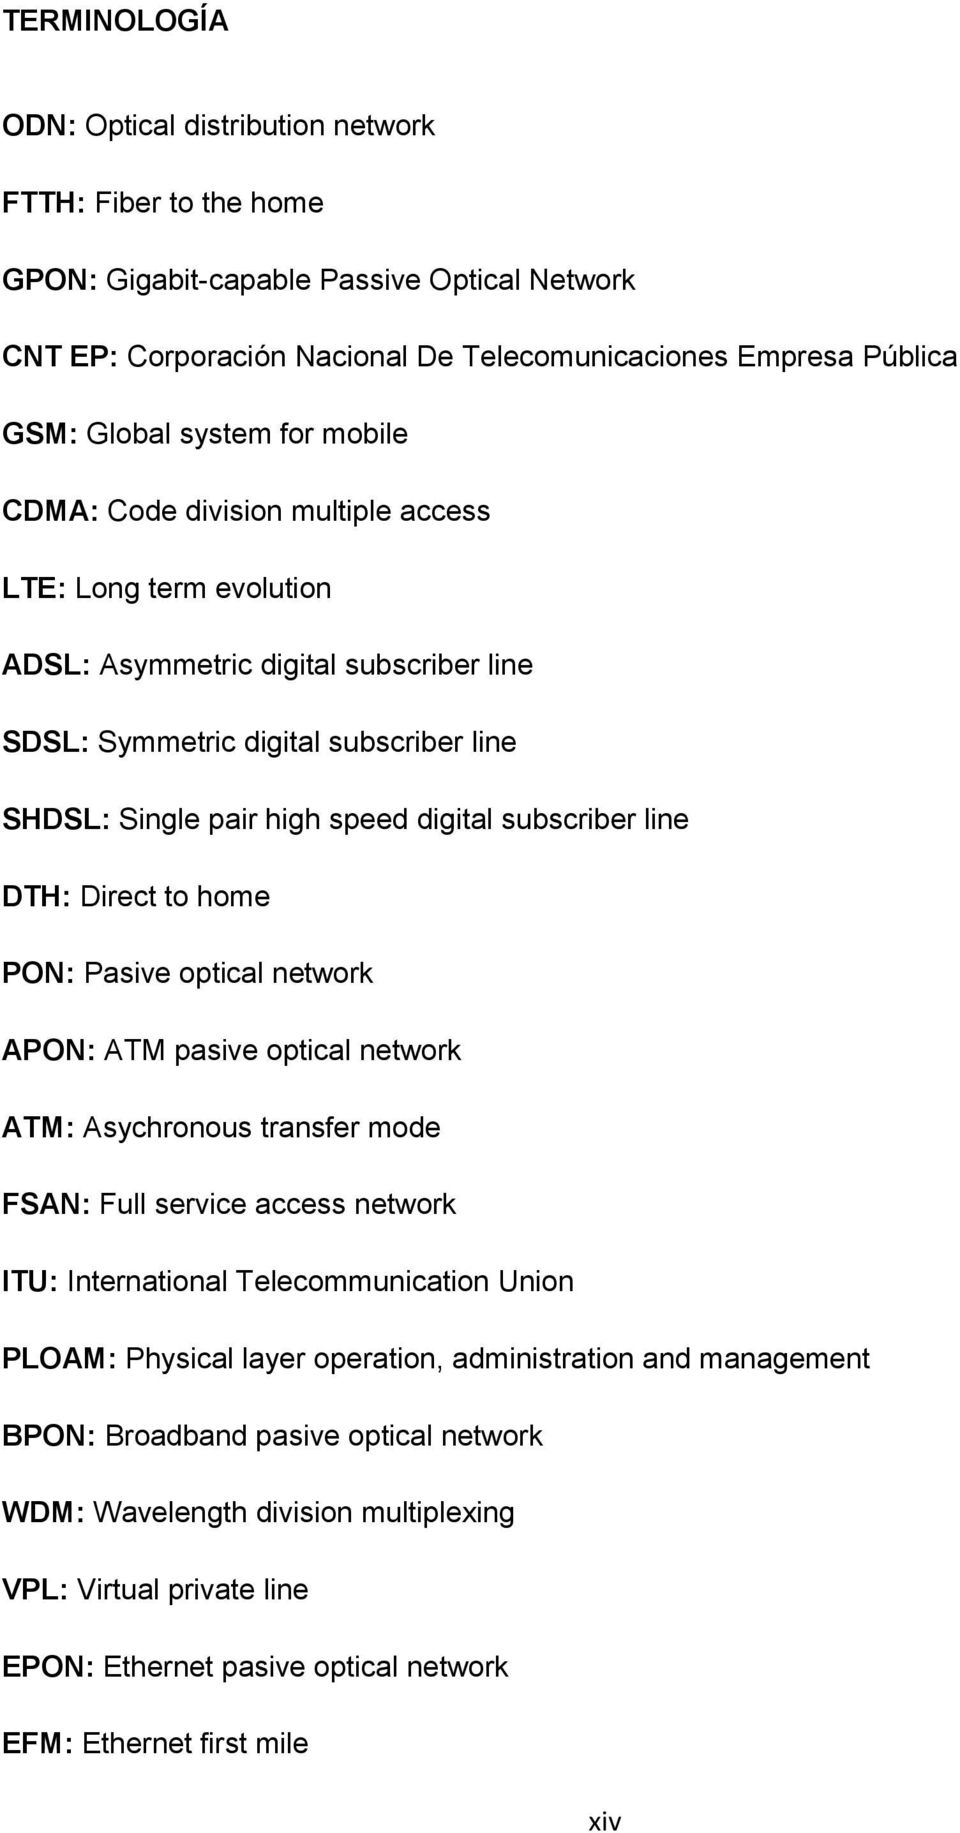 subscriber line DTH: Direct to home PON: Pasive optical network APON: ATM pasive optical network ATM: Asychronous transfer mode FSAN: Full service access network ITU: International Telecommunication